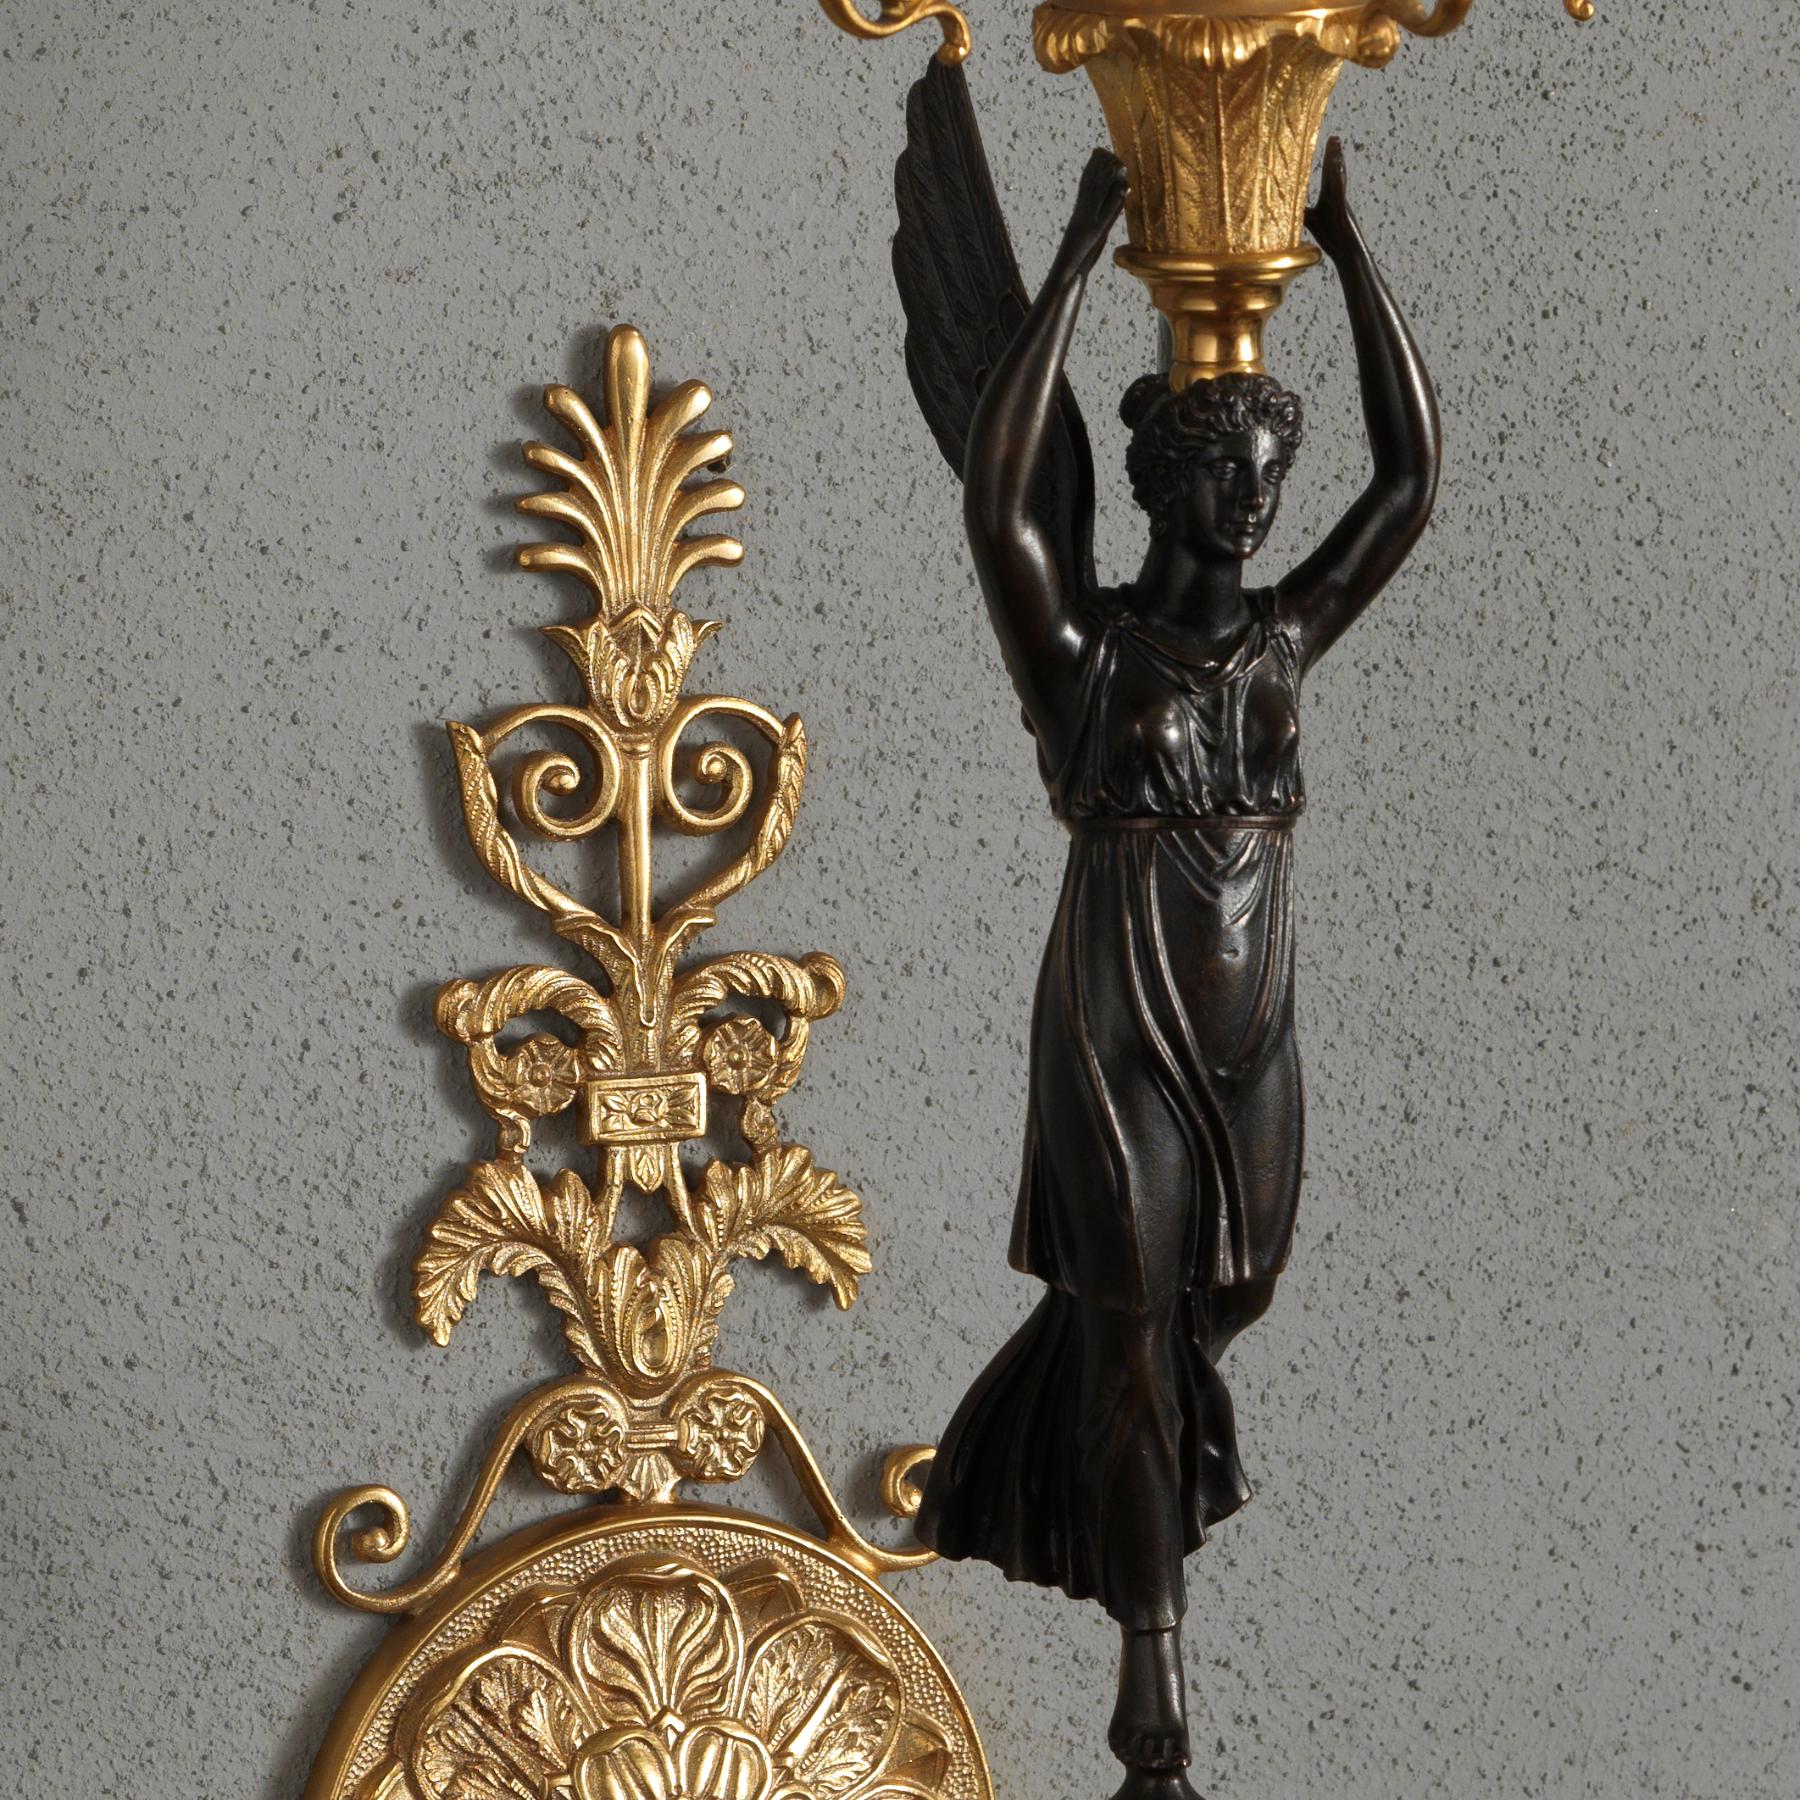 This French Empire style gilt and burnished bronze victory wall Sconce is an elegant example of figural wall light that shows a winged Victory, mounted on a small gilt bronze round globe. Backplate is exquisitely worked and it shows many high